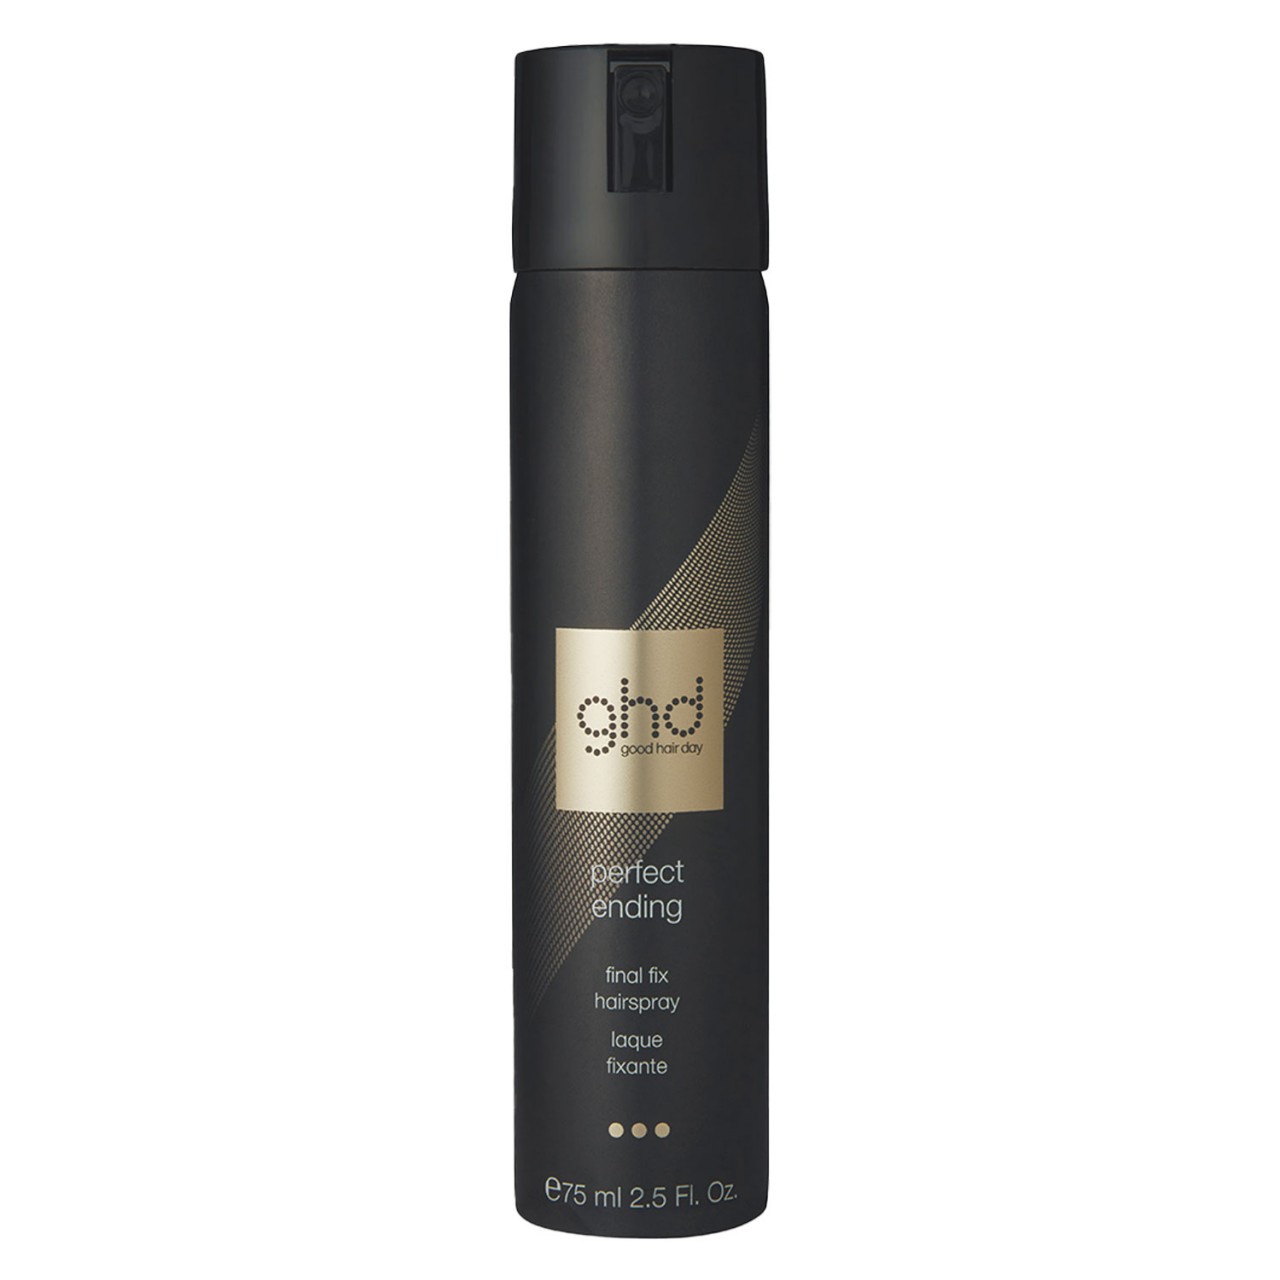 ghd Heat Protection Styling System - Perfect Ending Final Fix Hairspray von ghd